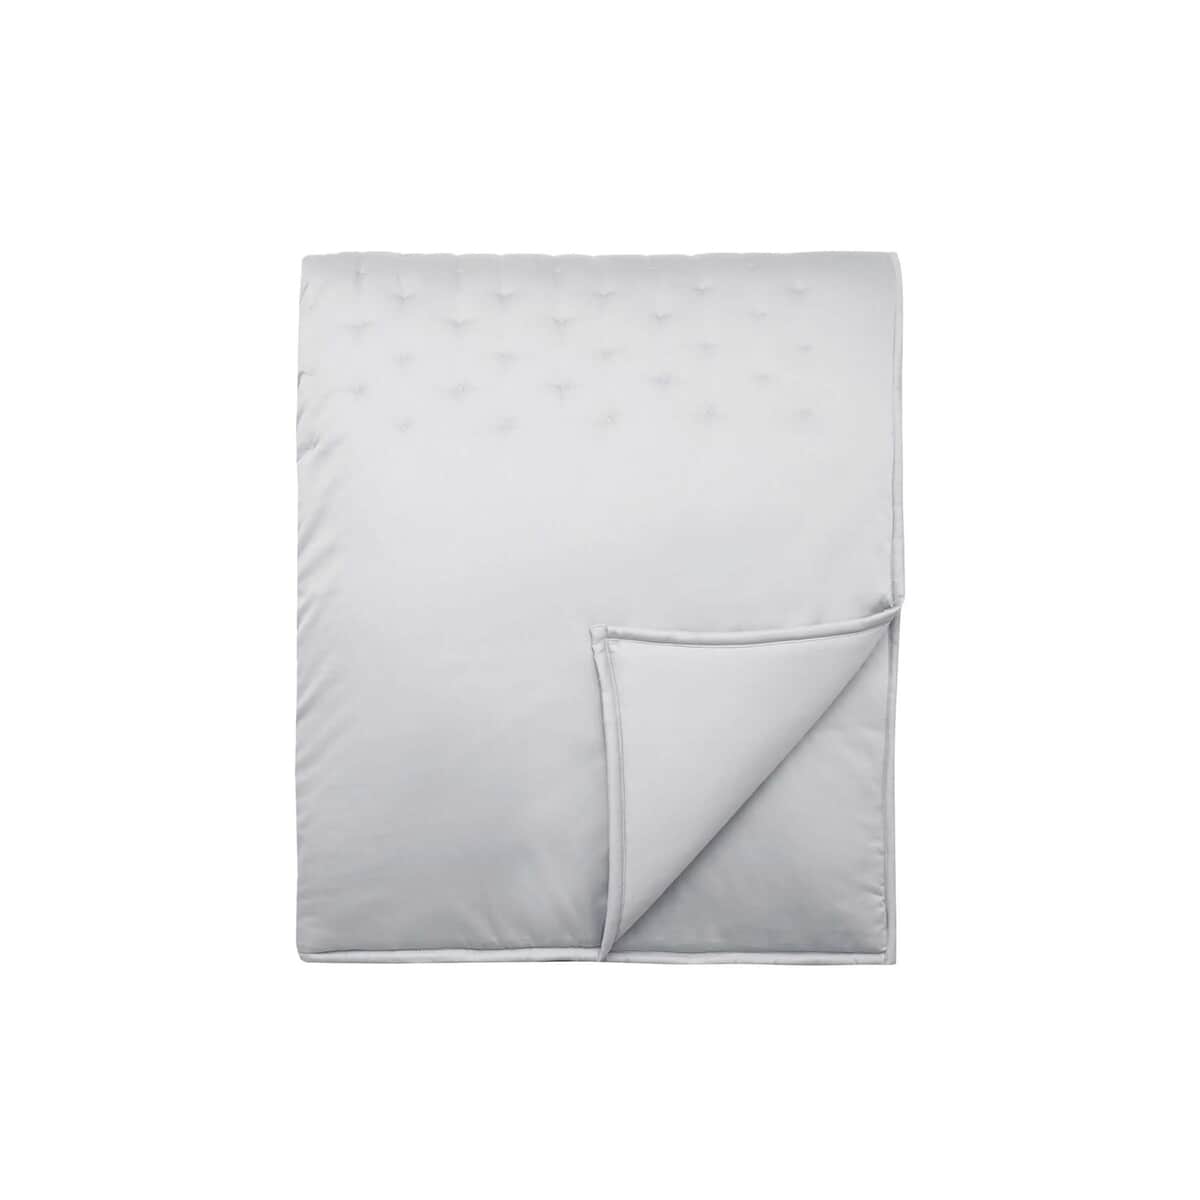 Himeya Stitched Quilt Throw Mineral Grey large